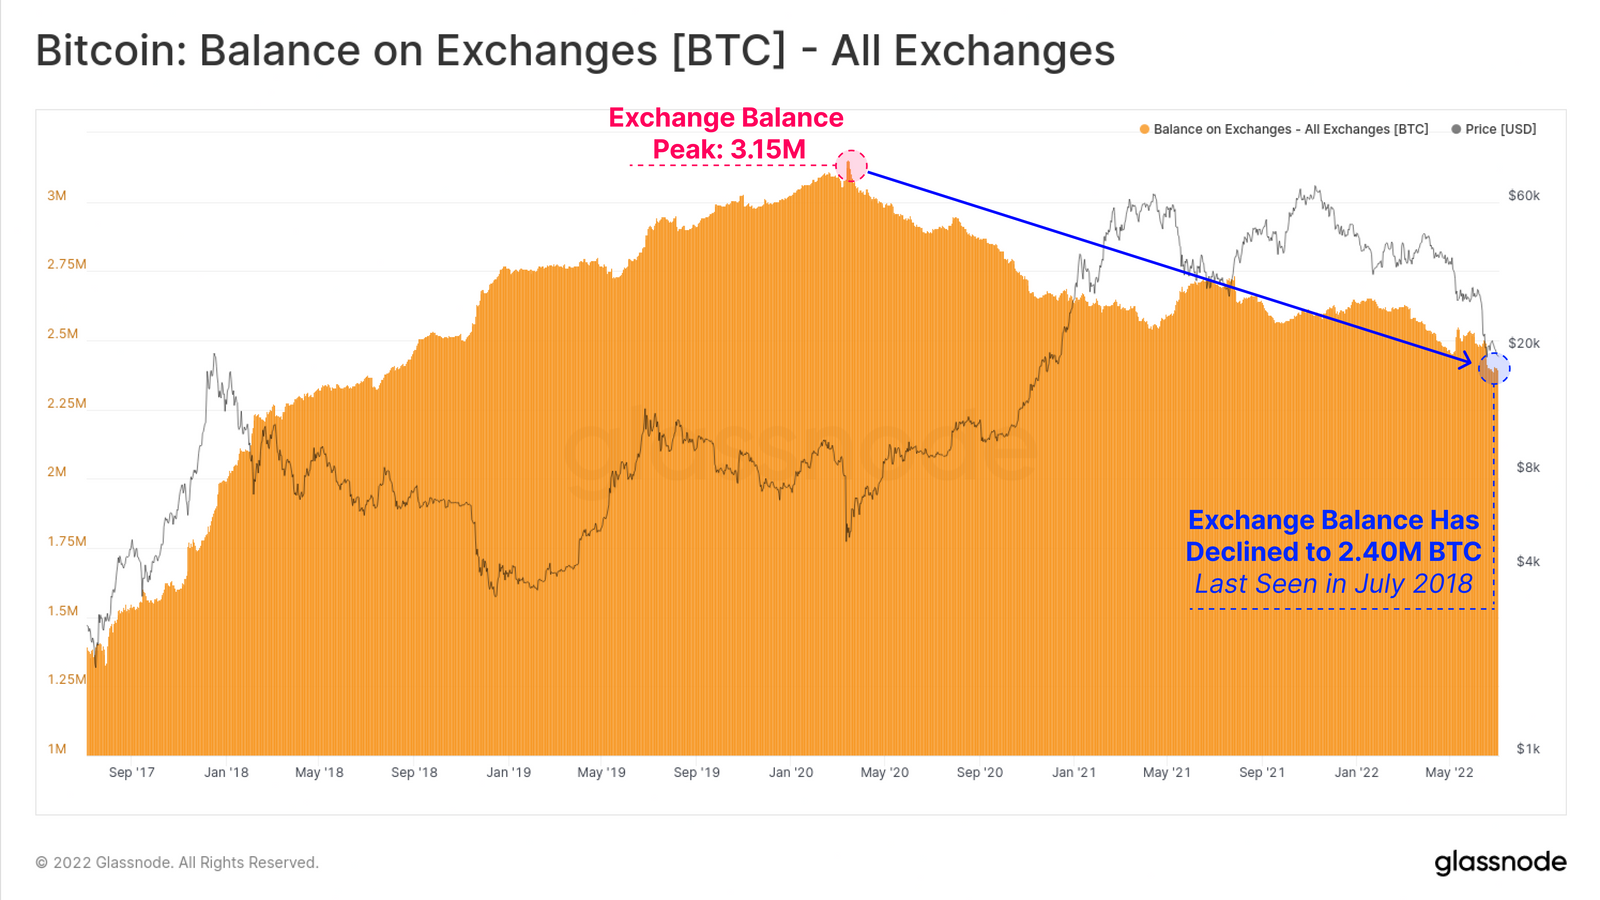 Bitcoin Holdings on Crypto Exchanges